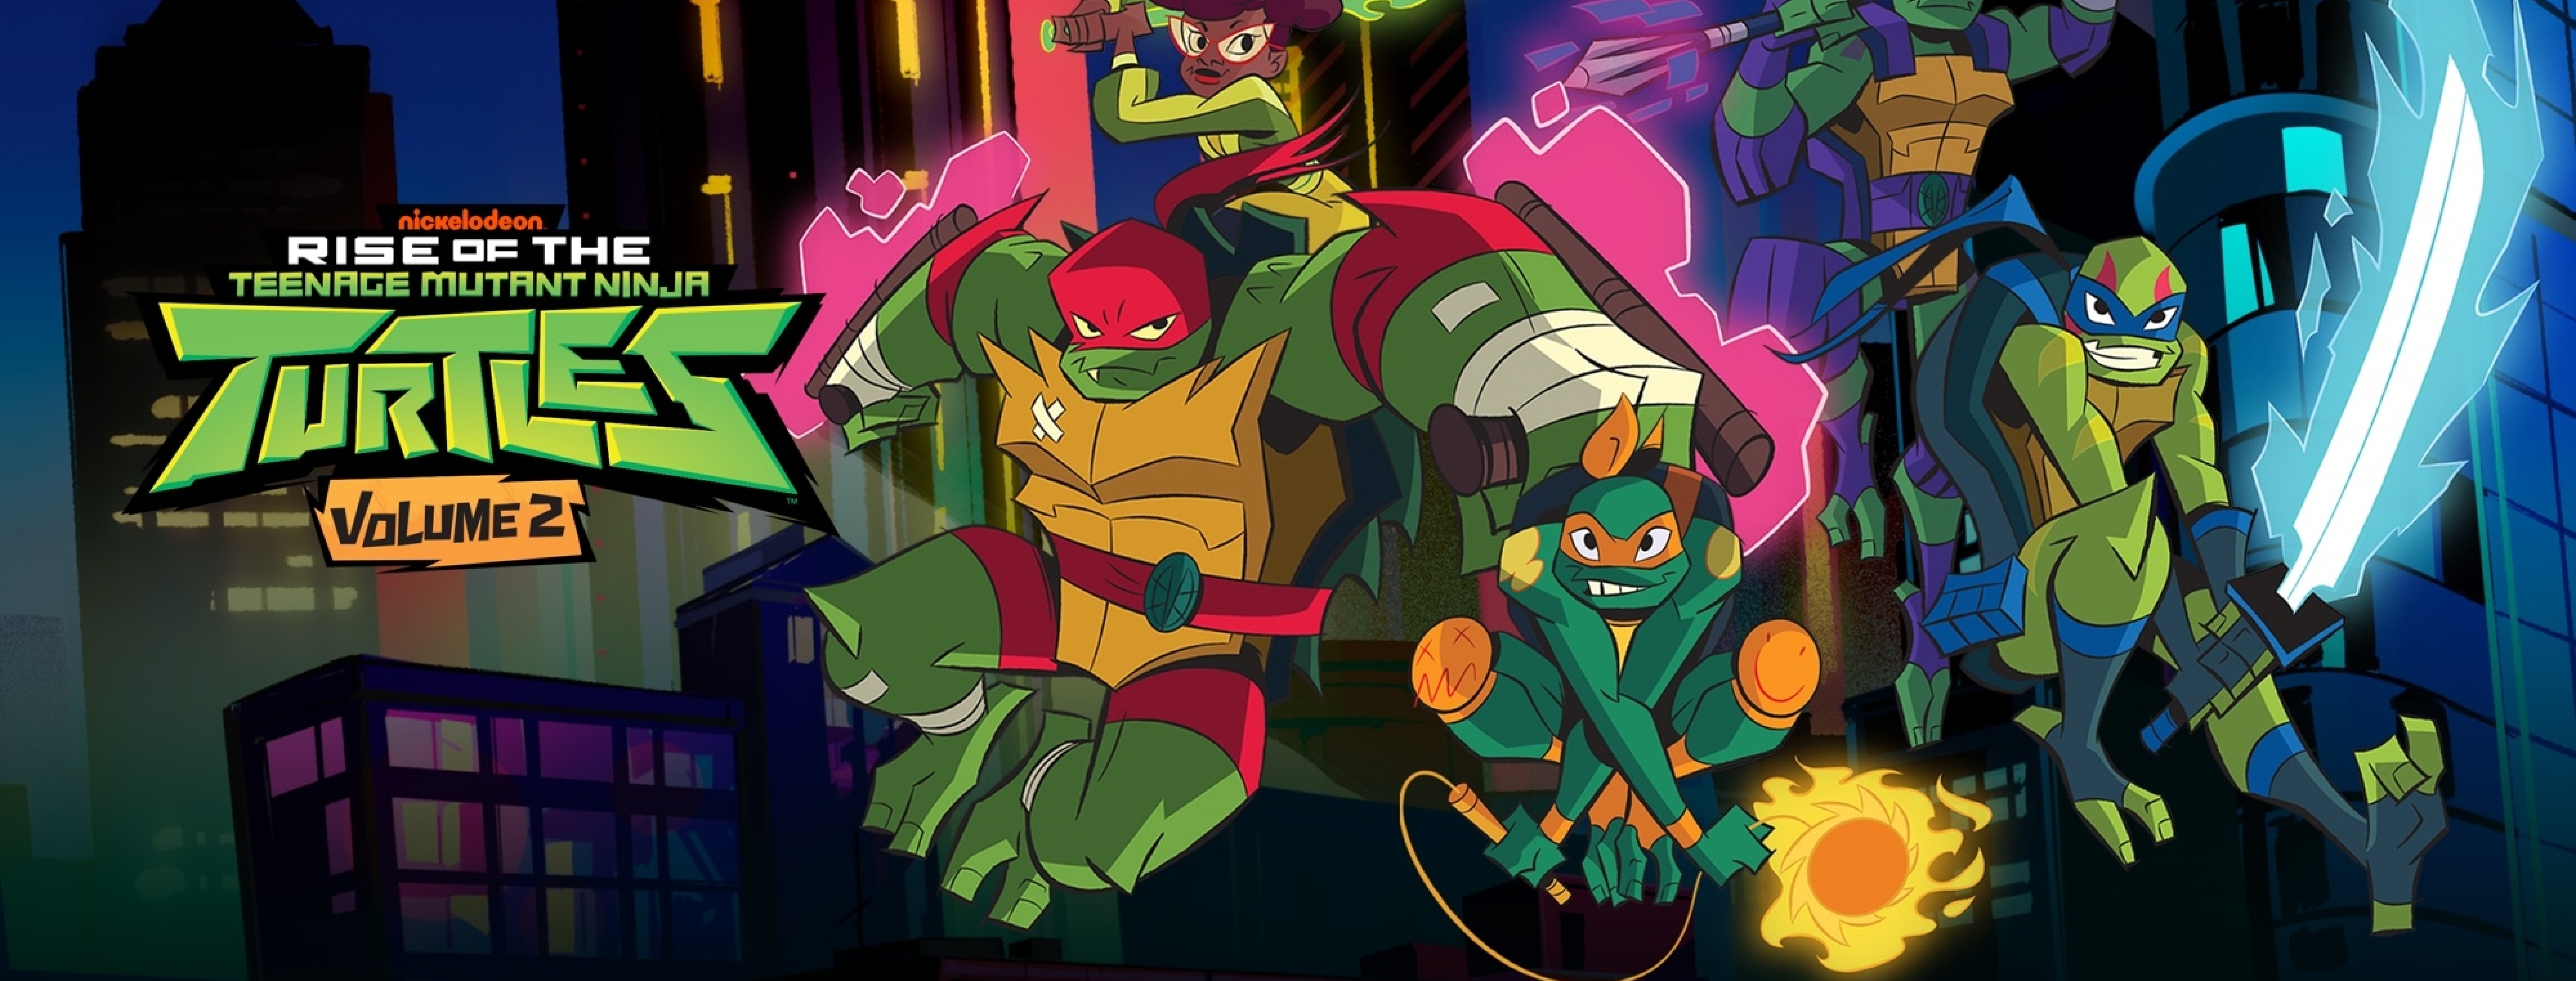  Jared   BLM   c0mms closed  on Twitter rise of the tmnt  screenshots i took for wallpaper usage  httpstcofEdvQGh0Oh  Twitter